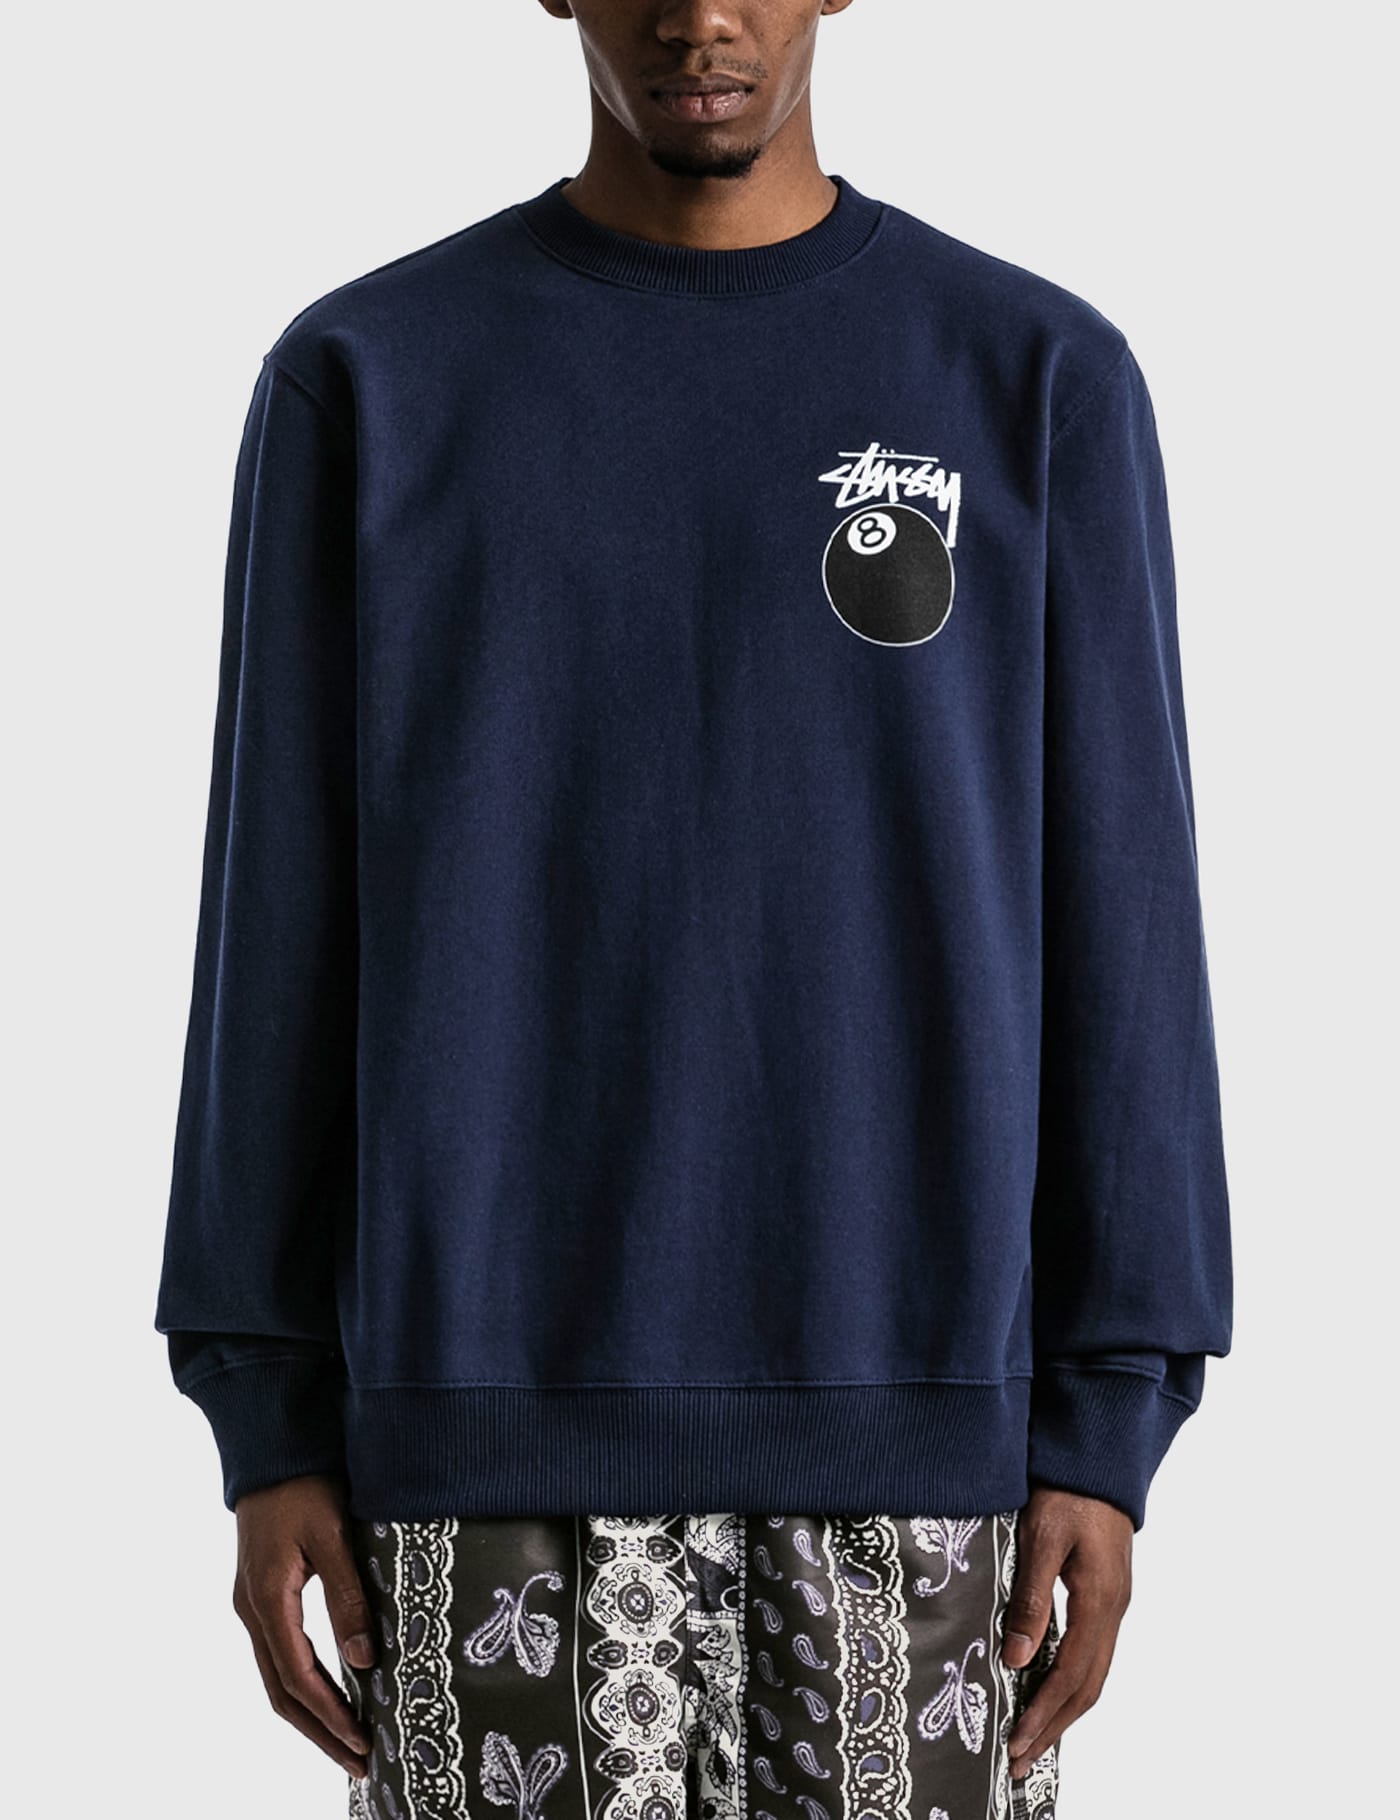 Stüssy   8 Ball Crew   HBX   Globally Curated Fashion and